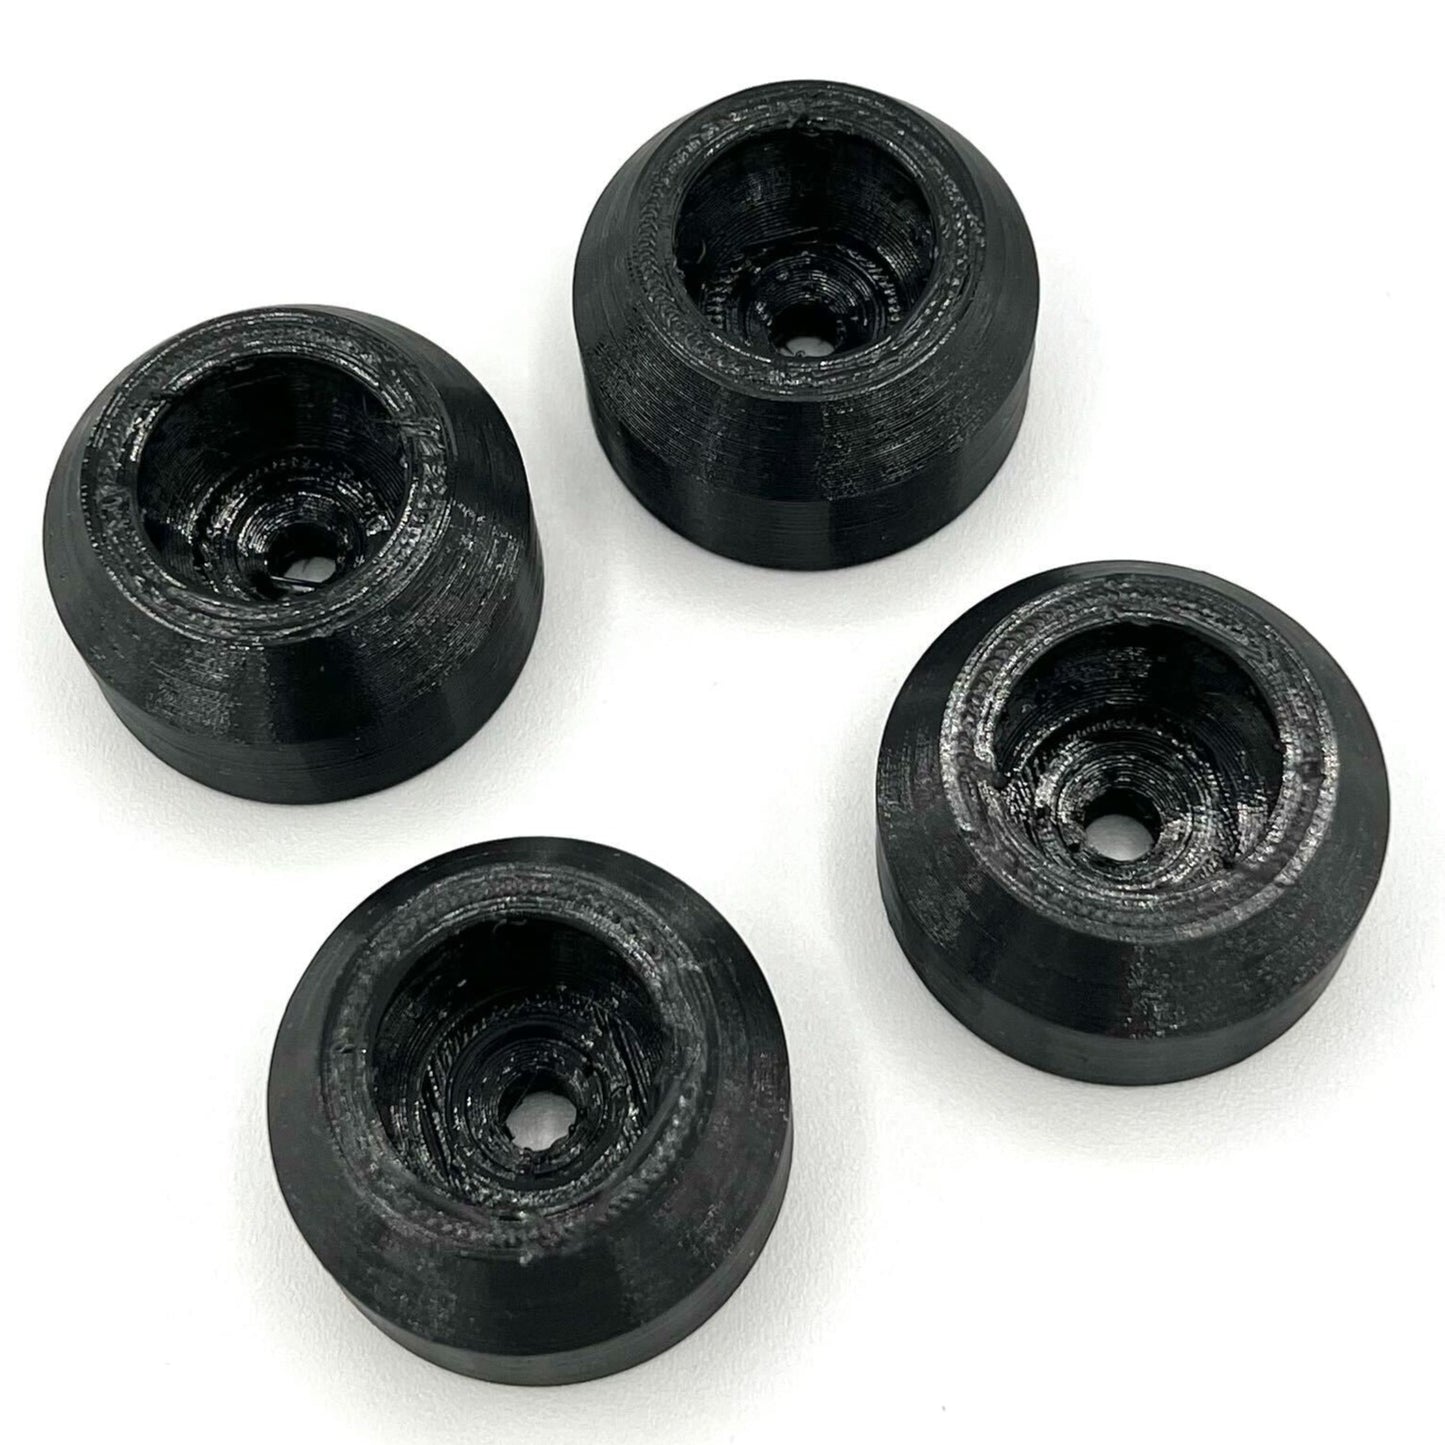 Hawk Helium Replacement Suction Cups Upgrade - Extra Strong! (4 Pack)